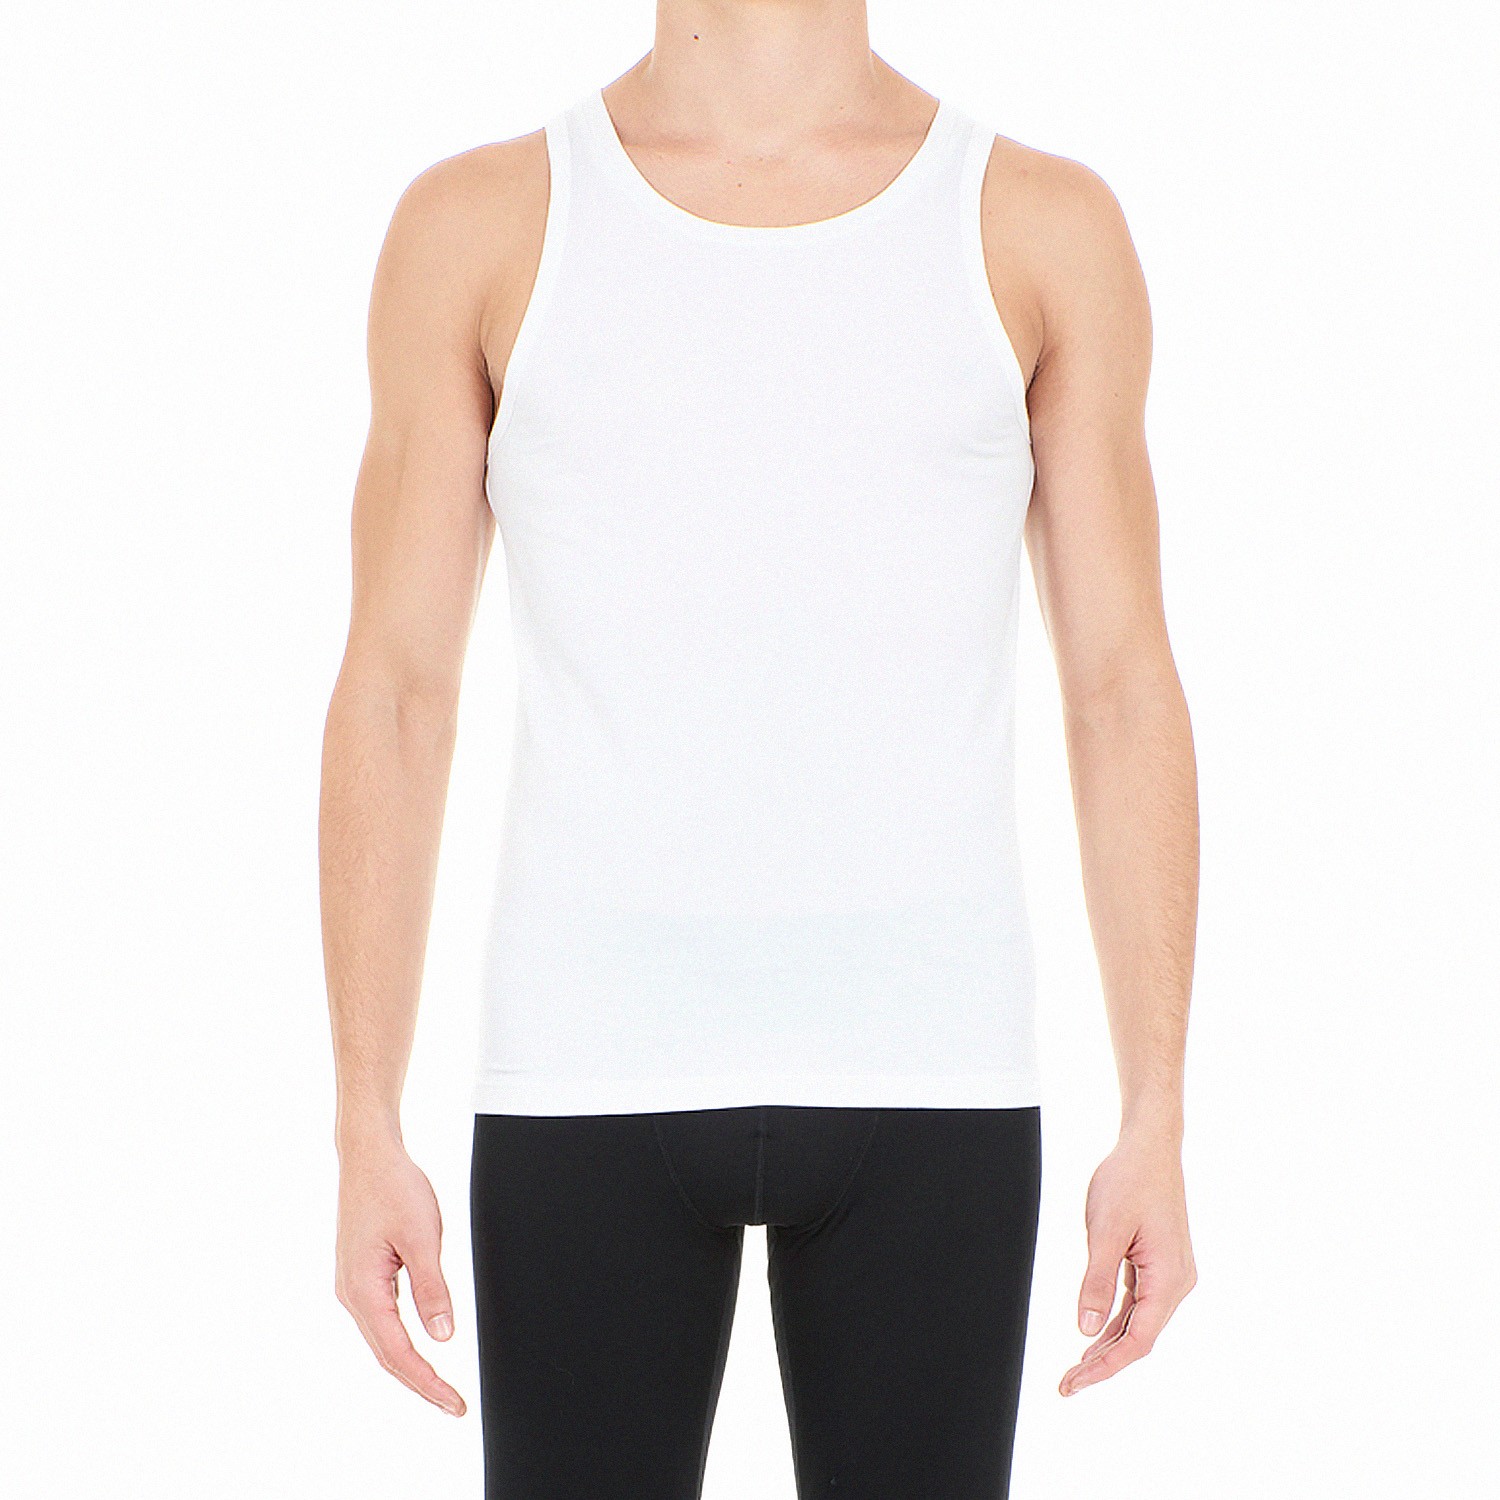 Supreme Cotton - white tank top: Tank top for man brand HOM for sal